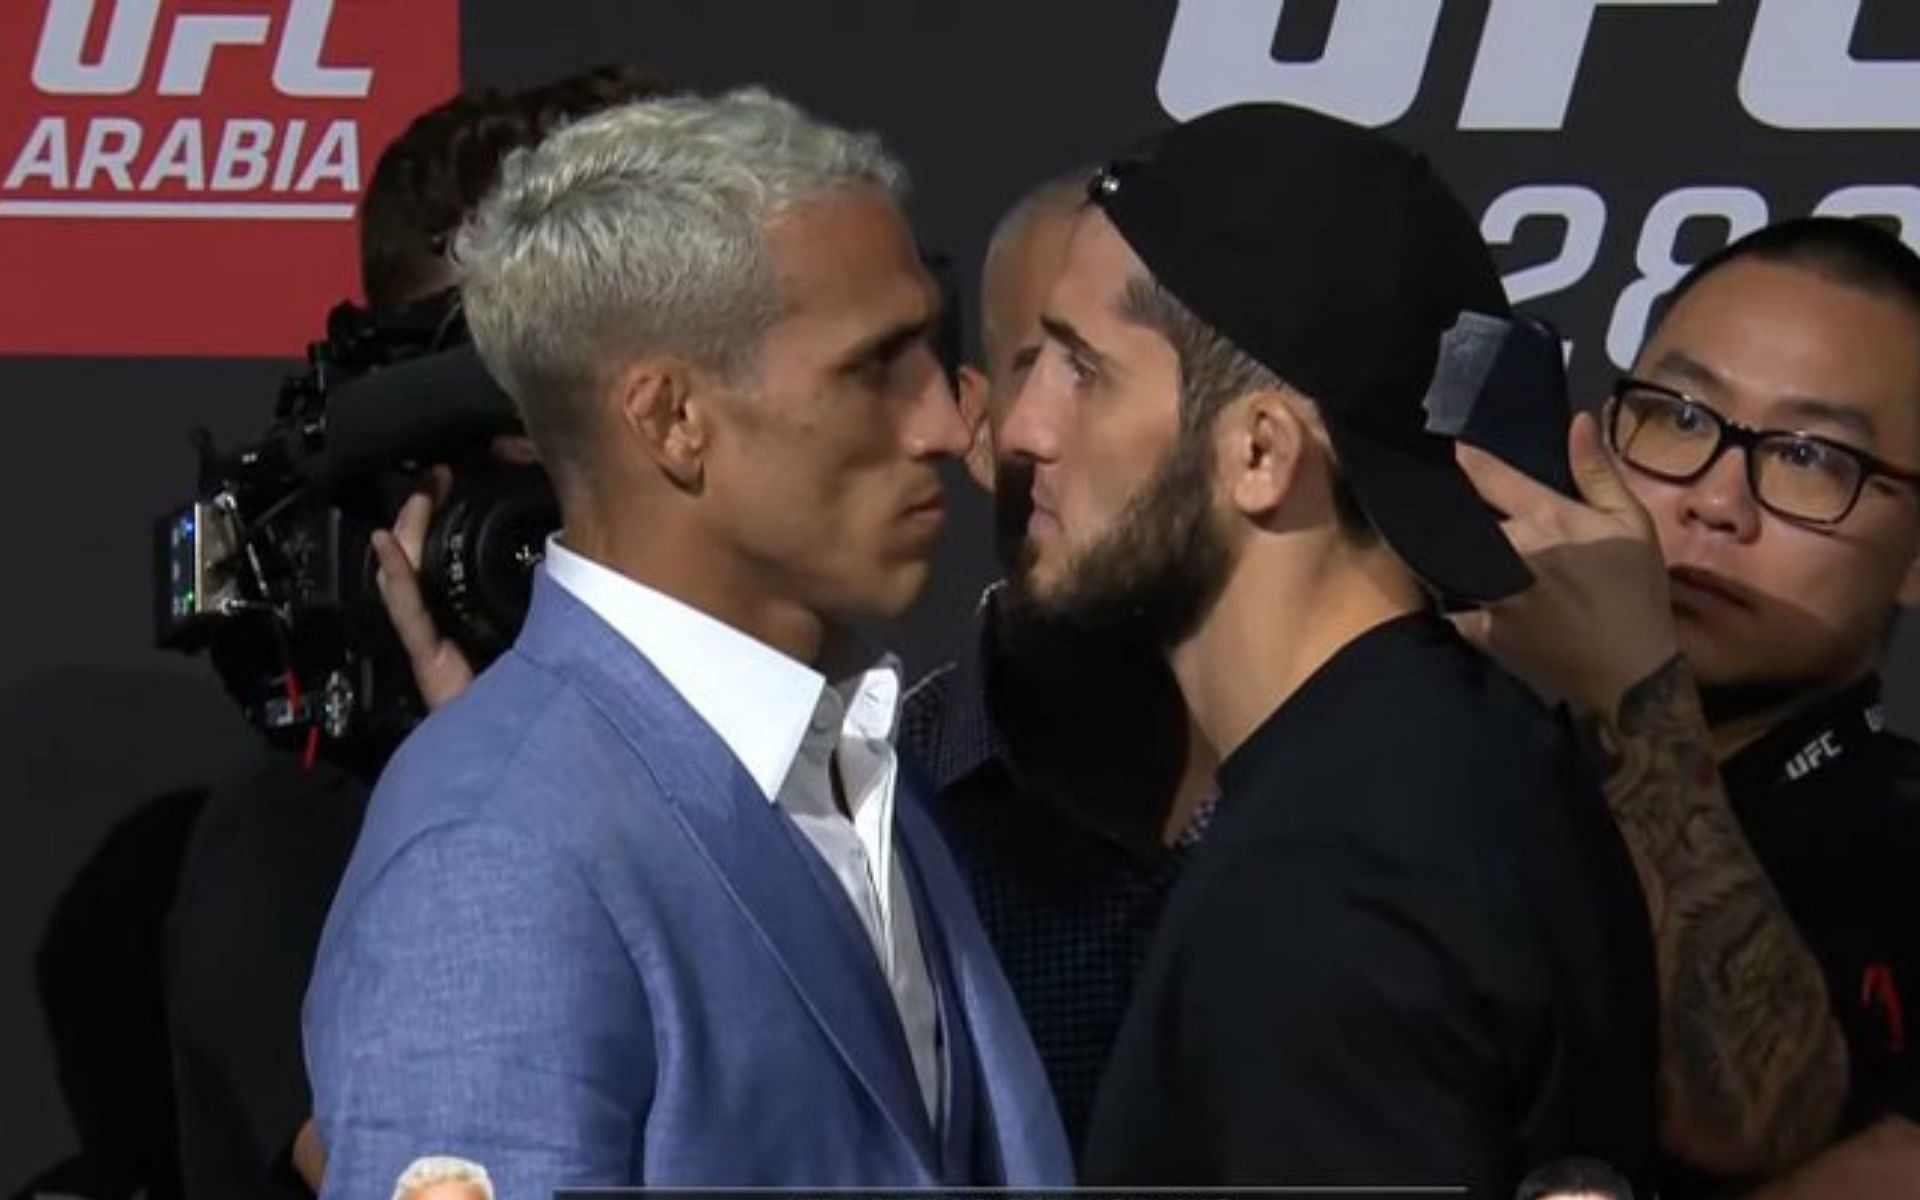 Charles Oliveira (left) and Islam Makhachev (right) (Image credits @JohnBranniganUK on Twitter)